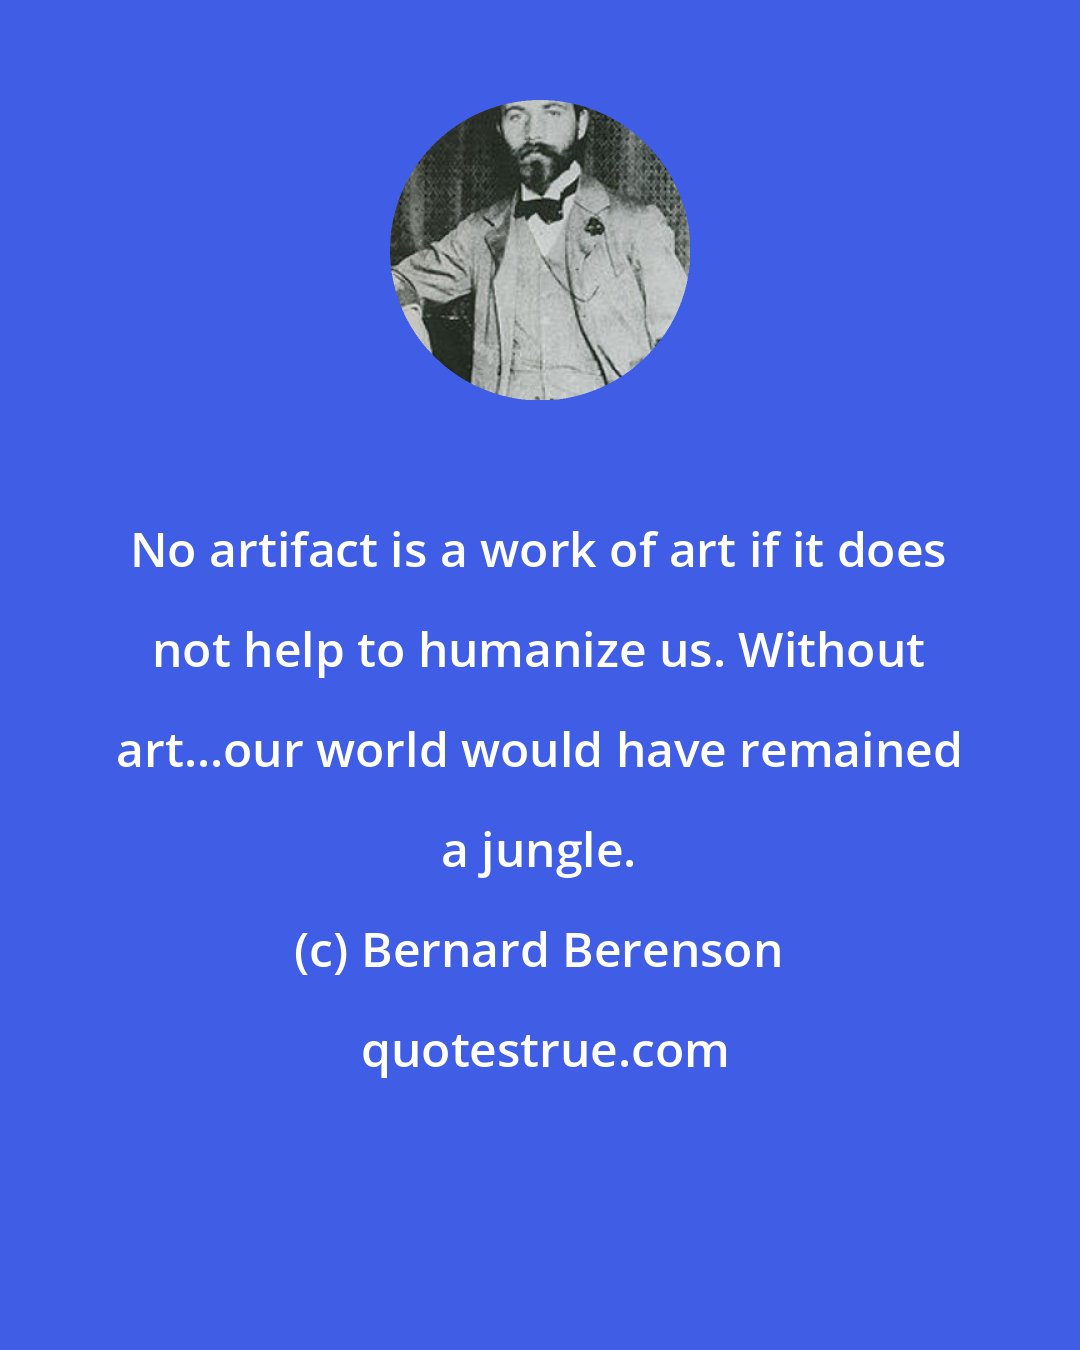 Bernard Berenson: No artifact is a work of art if it does not help to humanize us. Without art...our world would have remained a jungle.